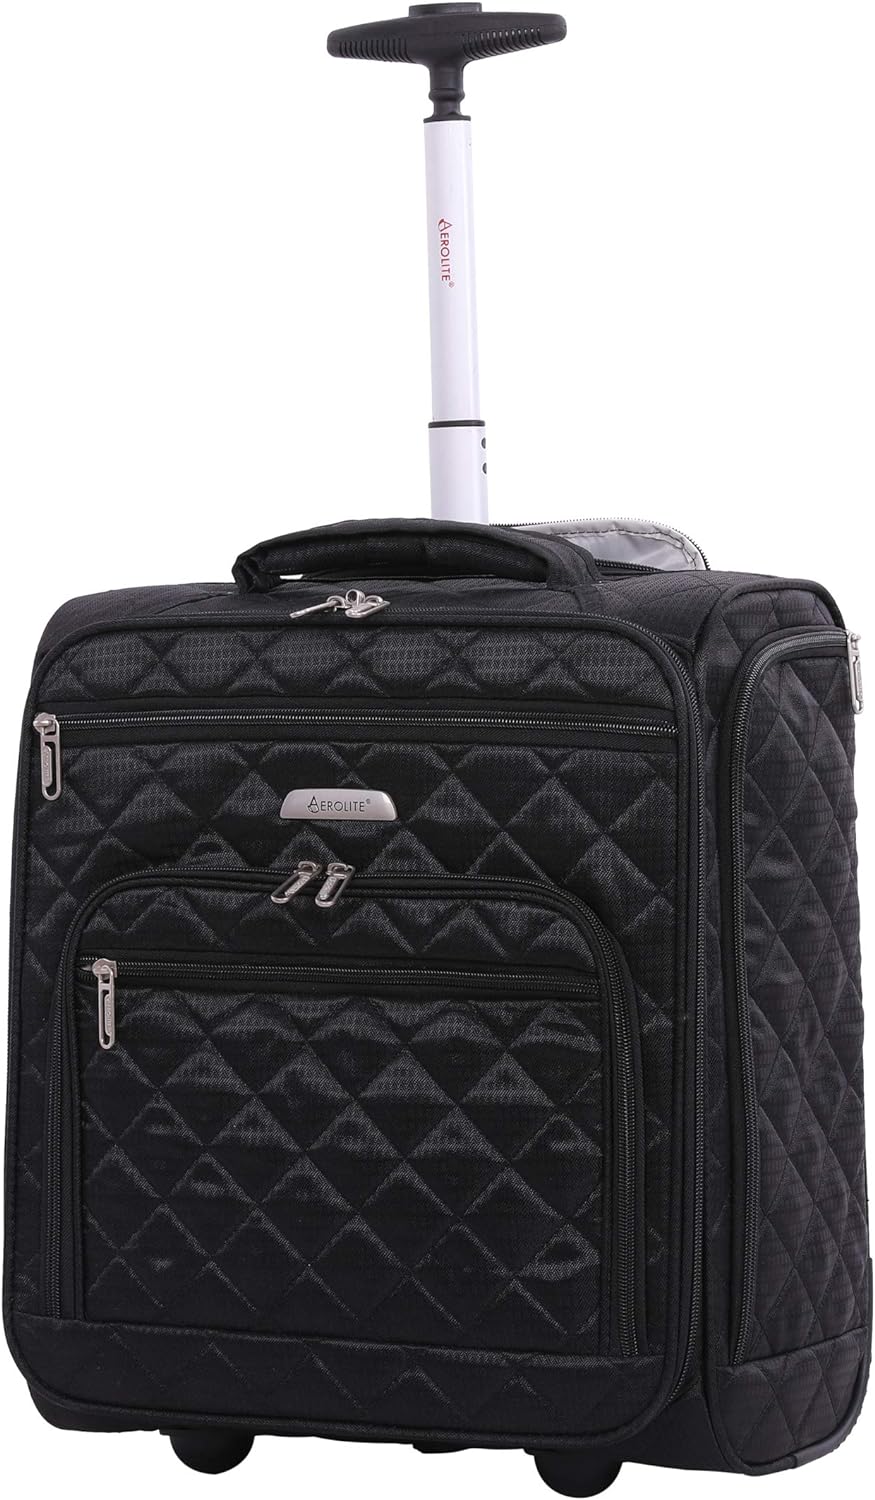 Aerolite Carry On Fits easyJet 45x36x20 Hand Cabin Luggage Under Seat Travel Trolley Bag Cabin Hand Luggage Suitcase 5 Years Warranty, 42x35x20cm 28L (Black)